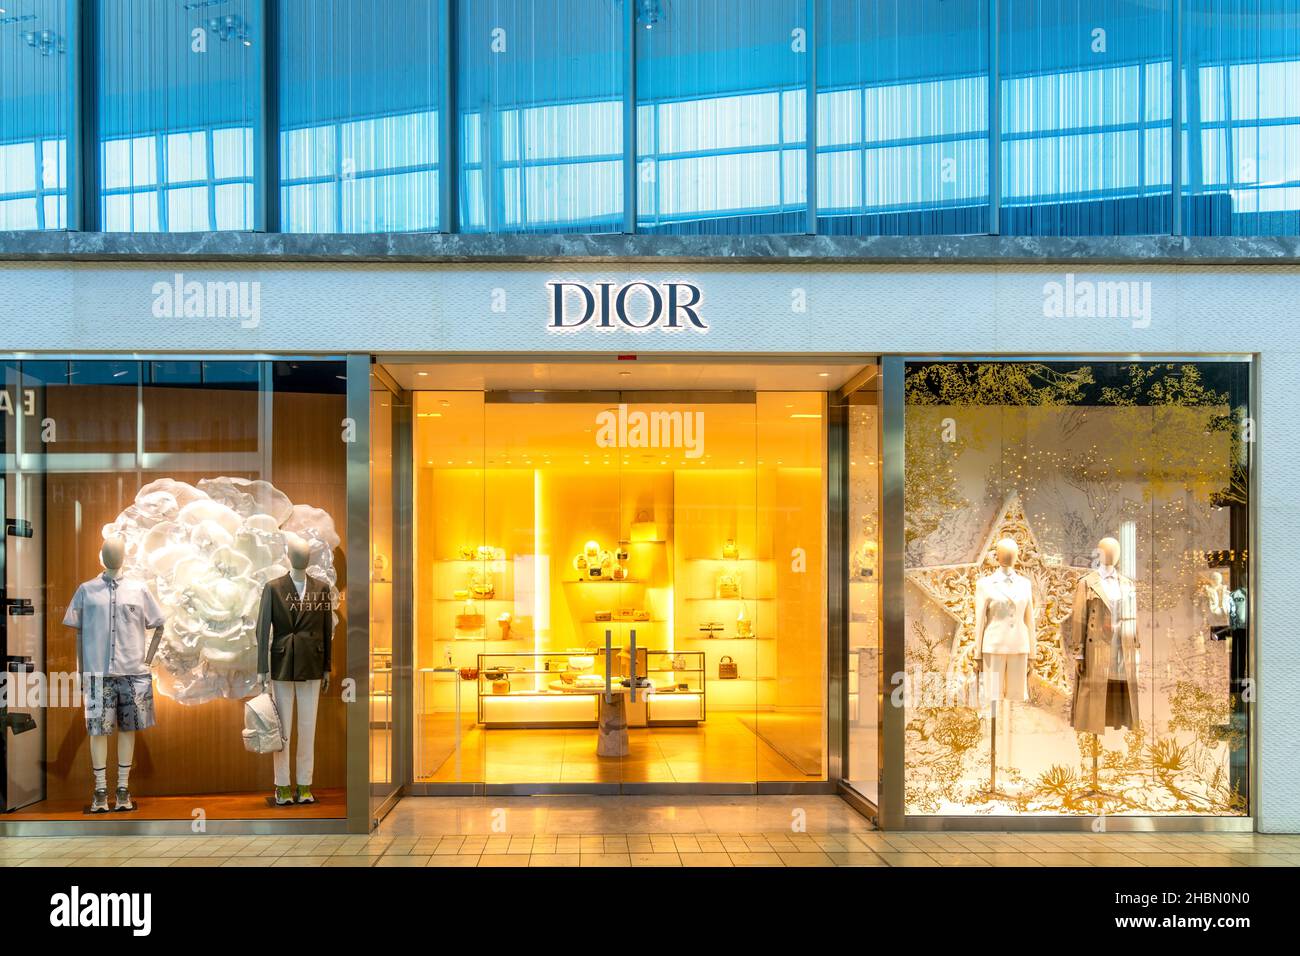 Shopping Mall, Dior, Courchevel, Savoie Department, France Stock Photo -  Alamy